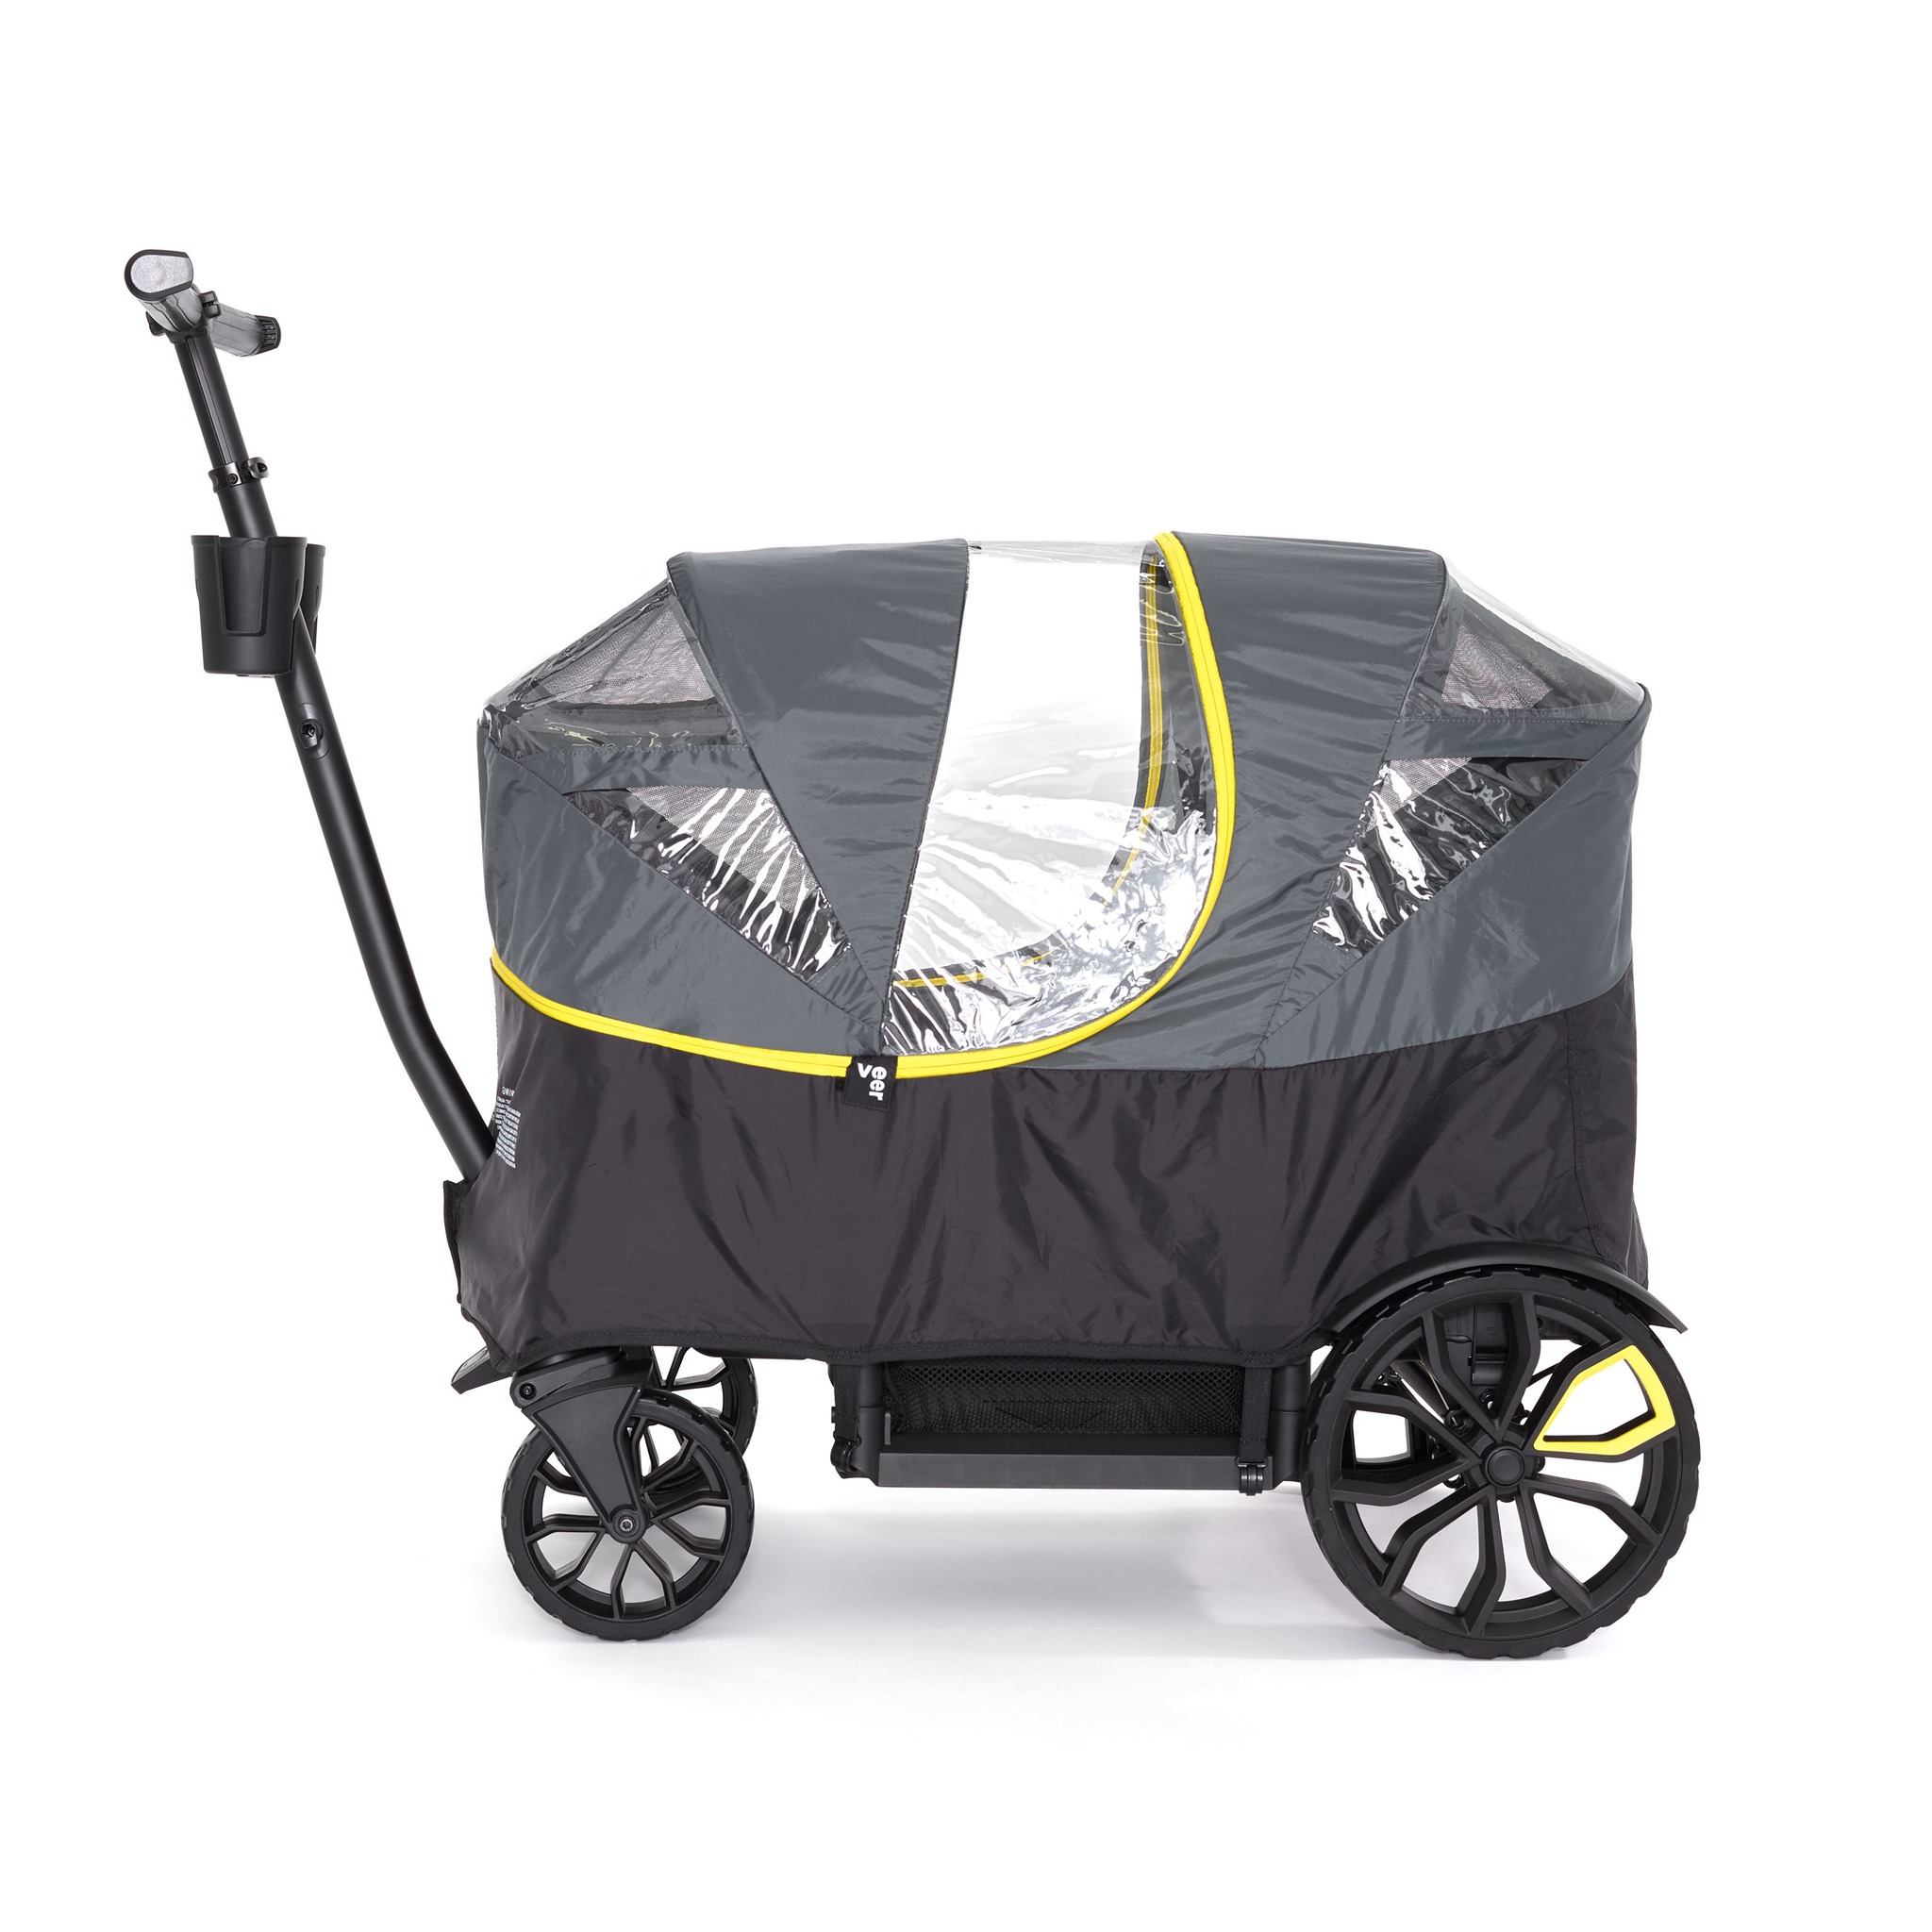 Veer Cruiser XL All-Terrain Weather Cover